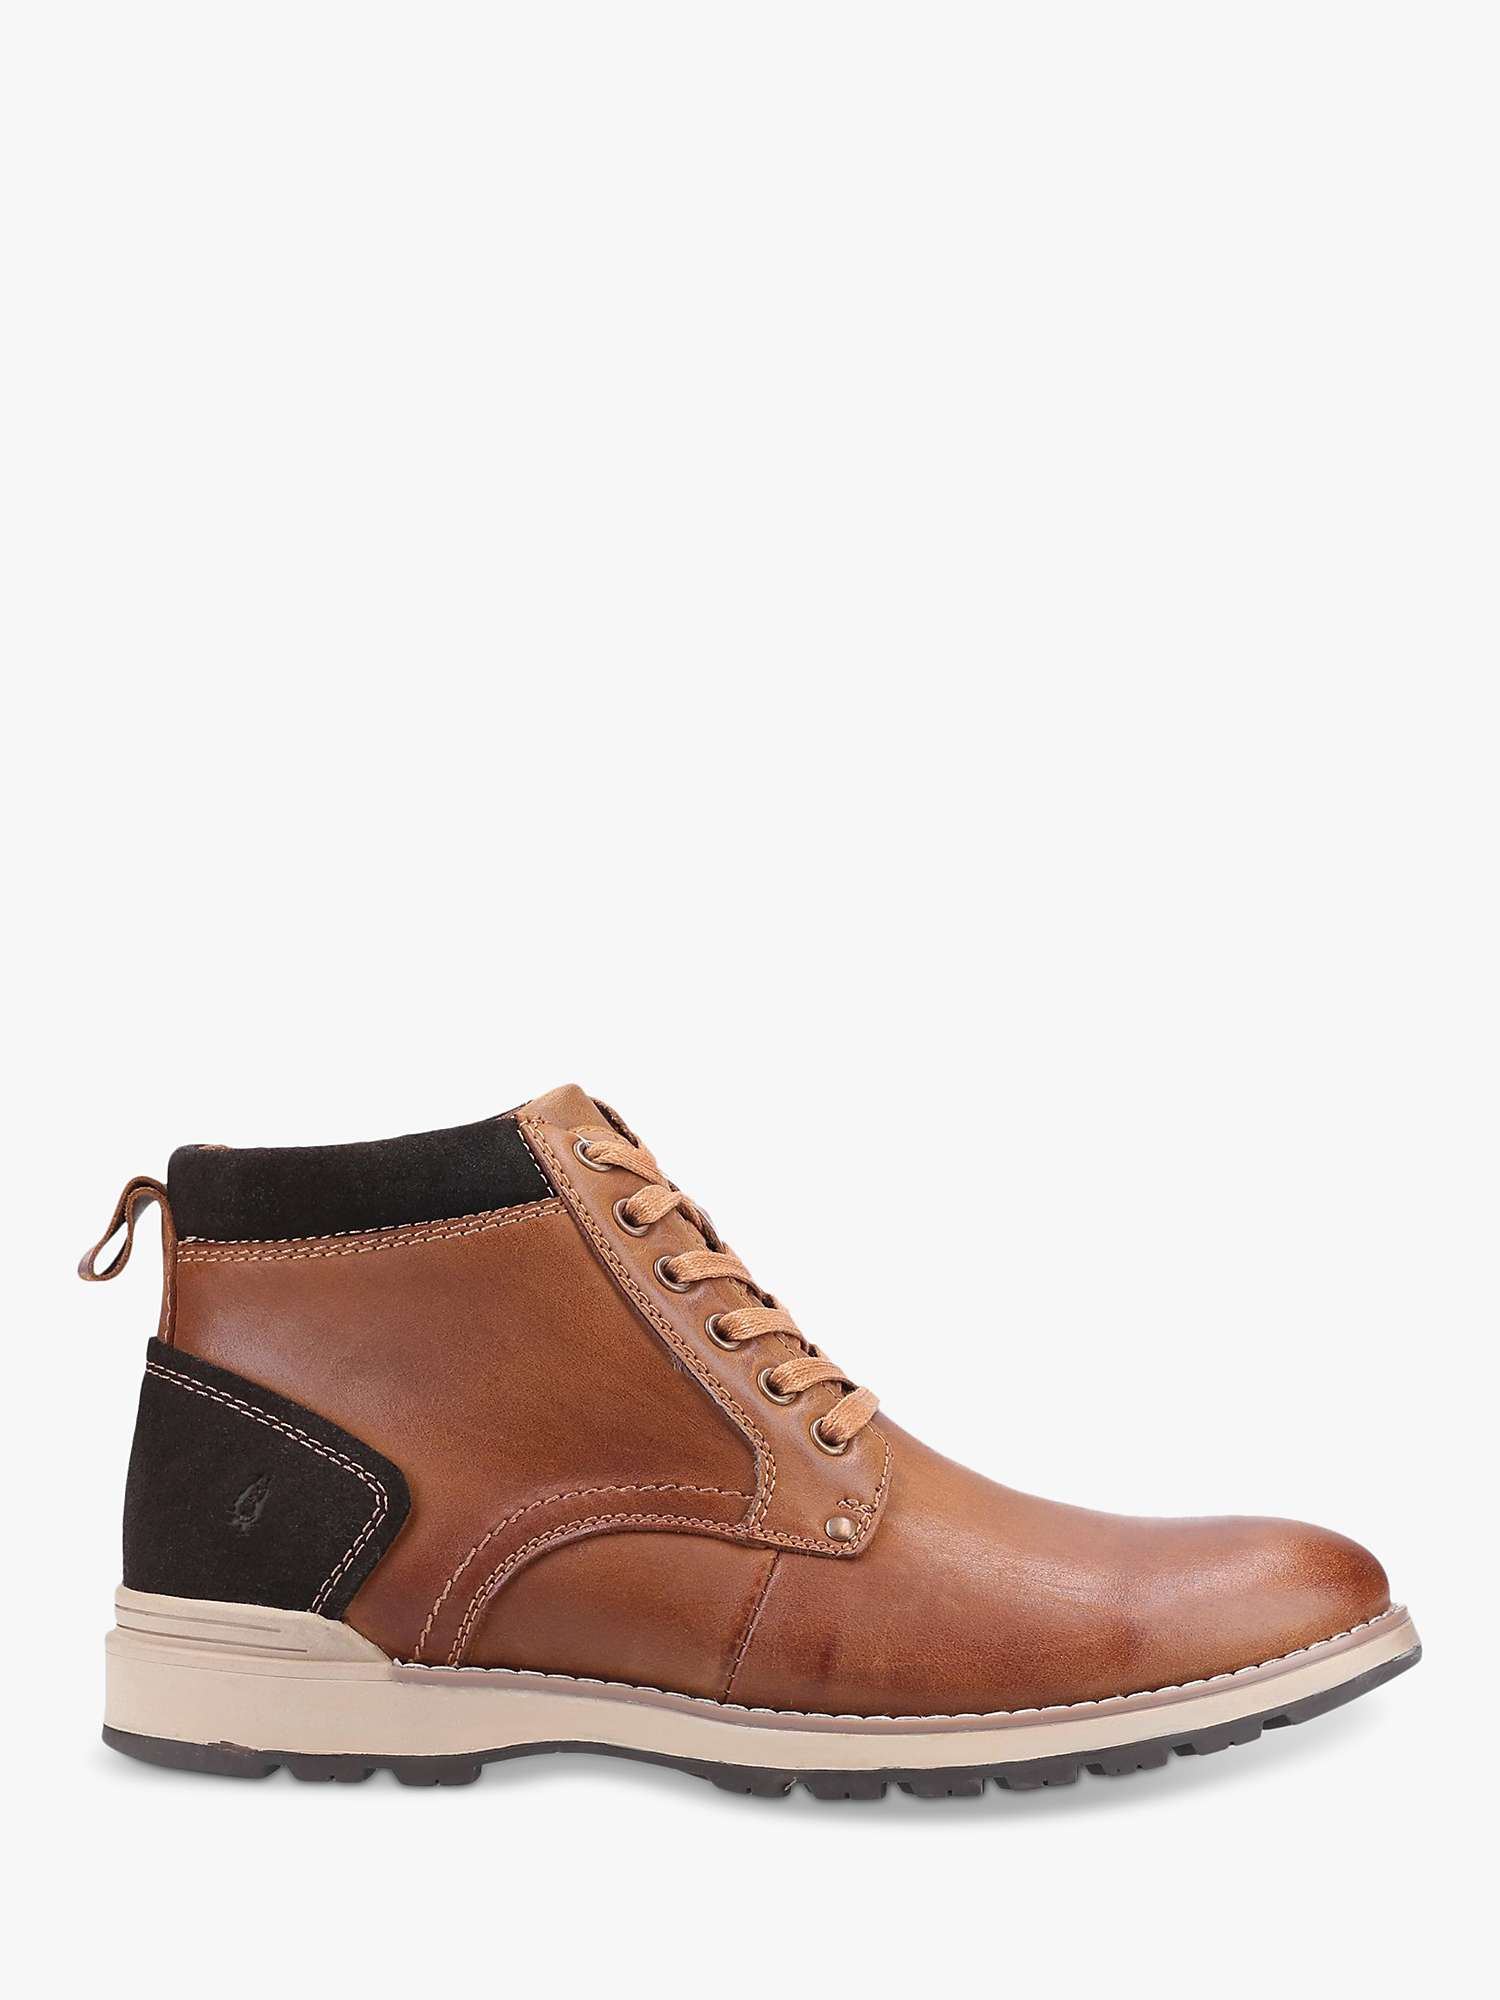 Buy Hush Puppies Dean Lace Up Leather Boots, Brown Online at johnlewis.com